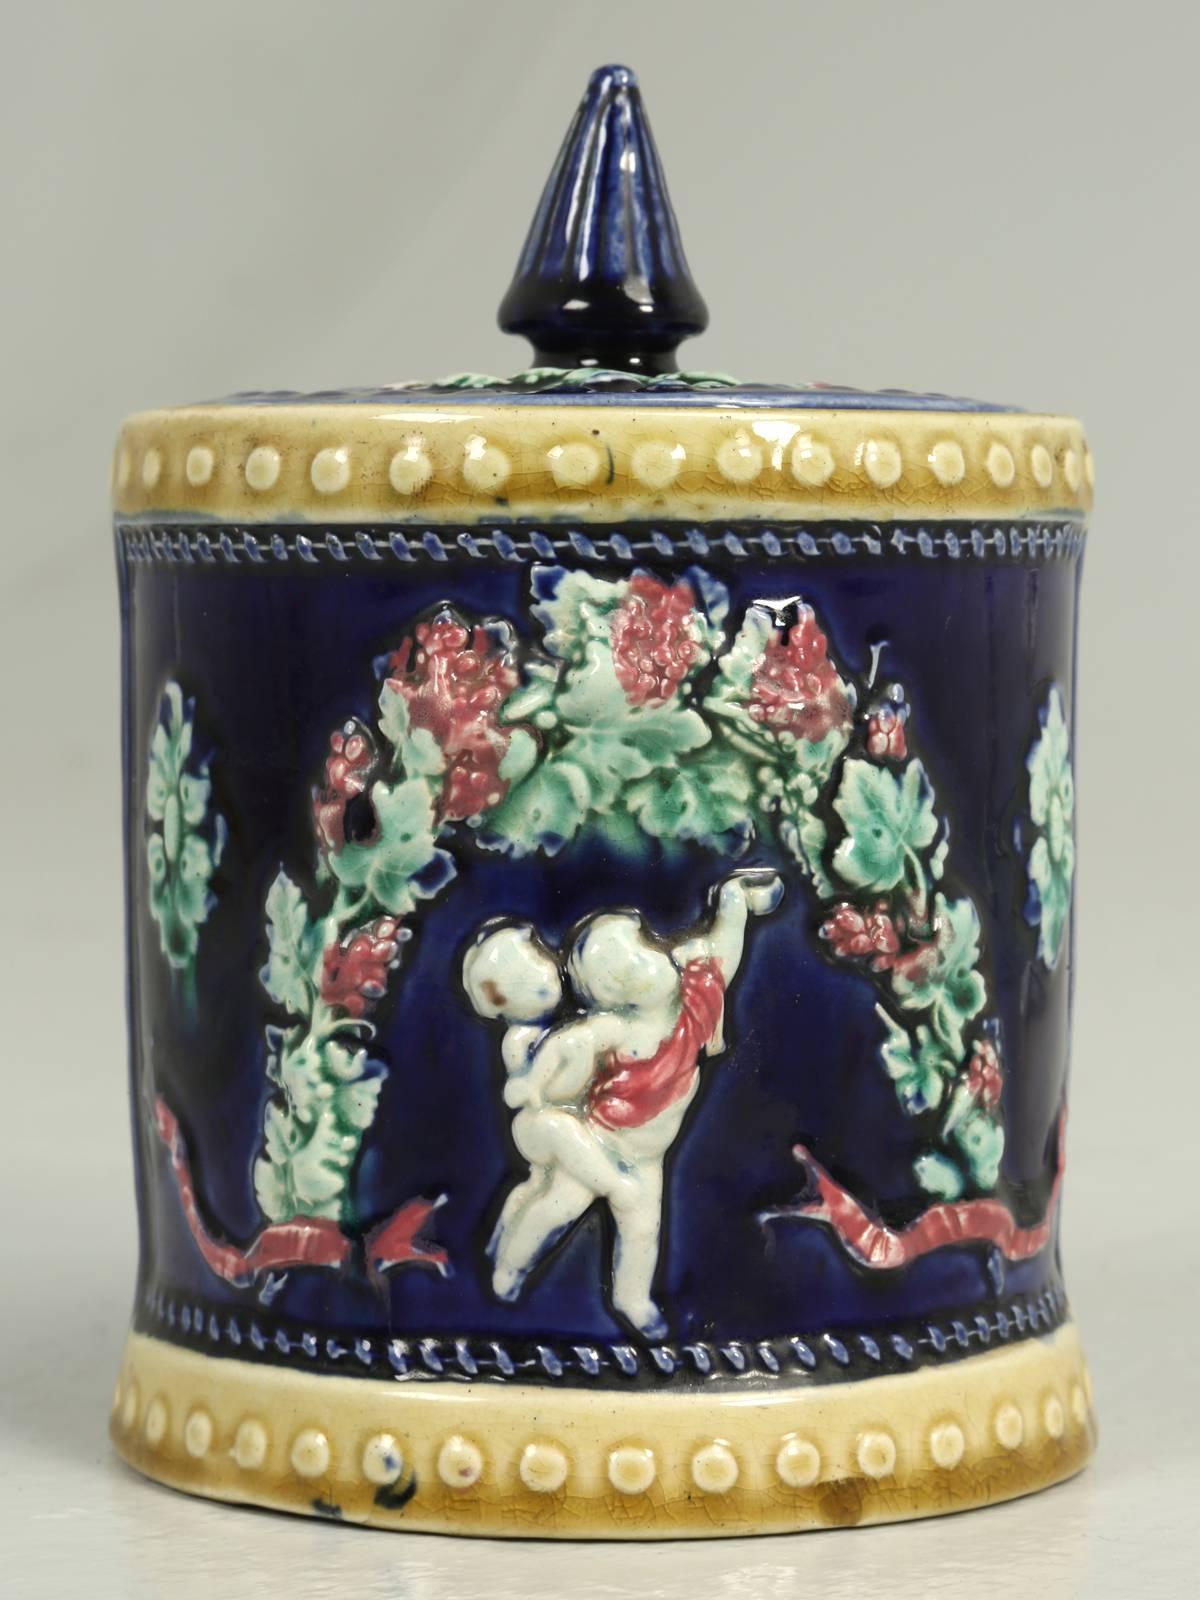 Antique English Condensed Milk Container with its original lid and glazed in a deep rich cobalt blue. Decorated with Putti’s and dates from the 1890s. No visible flaws or prior repairs.